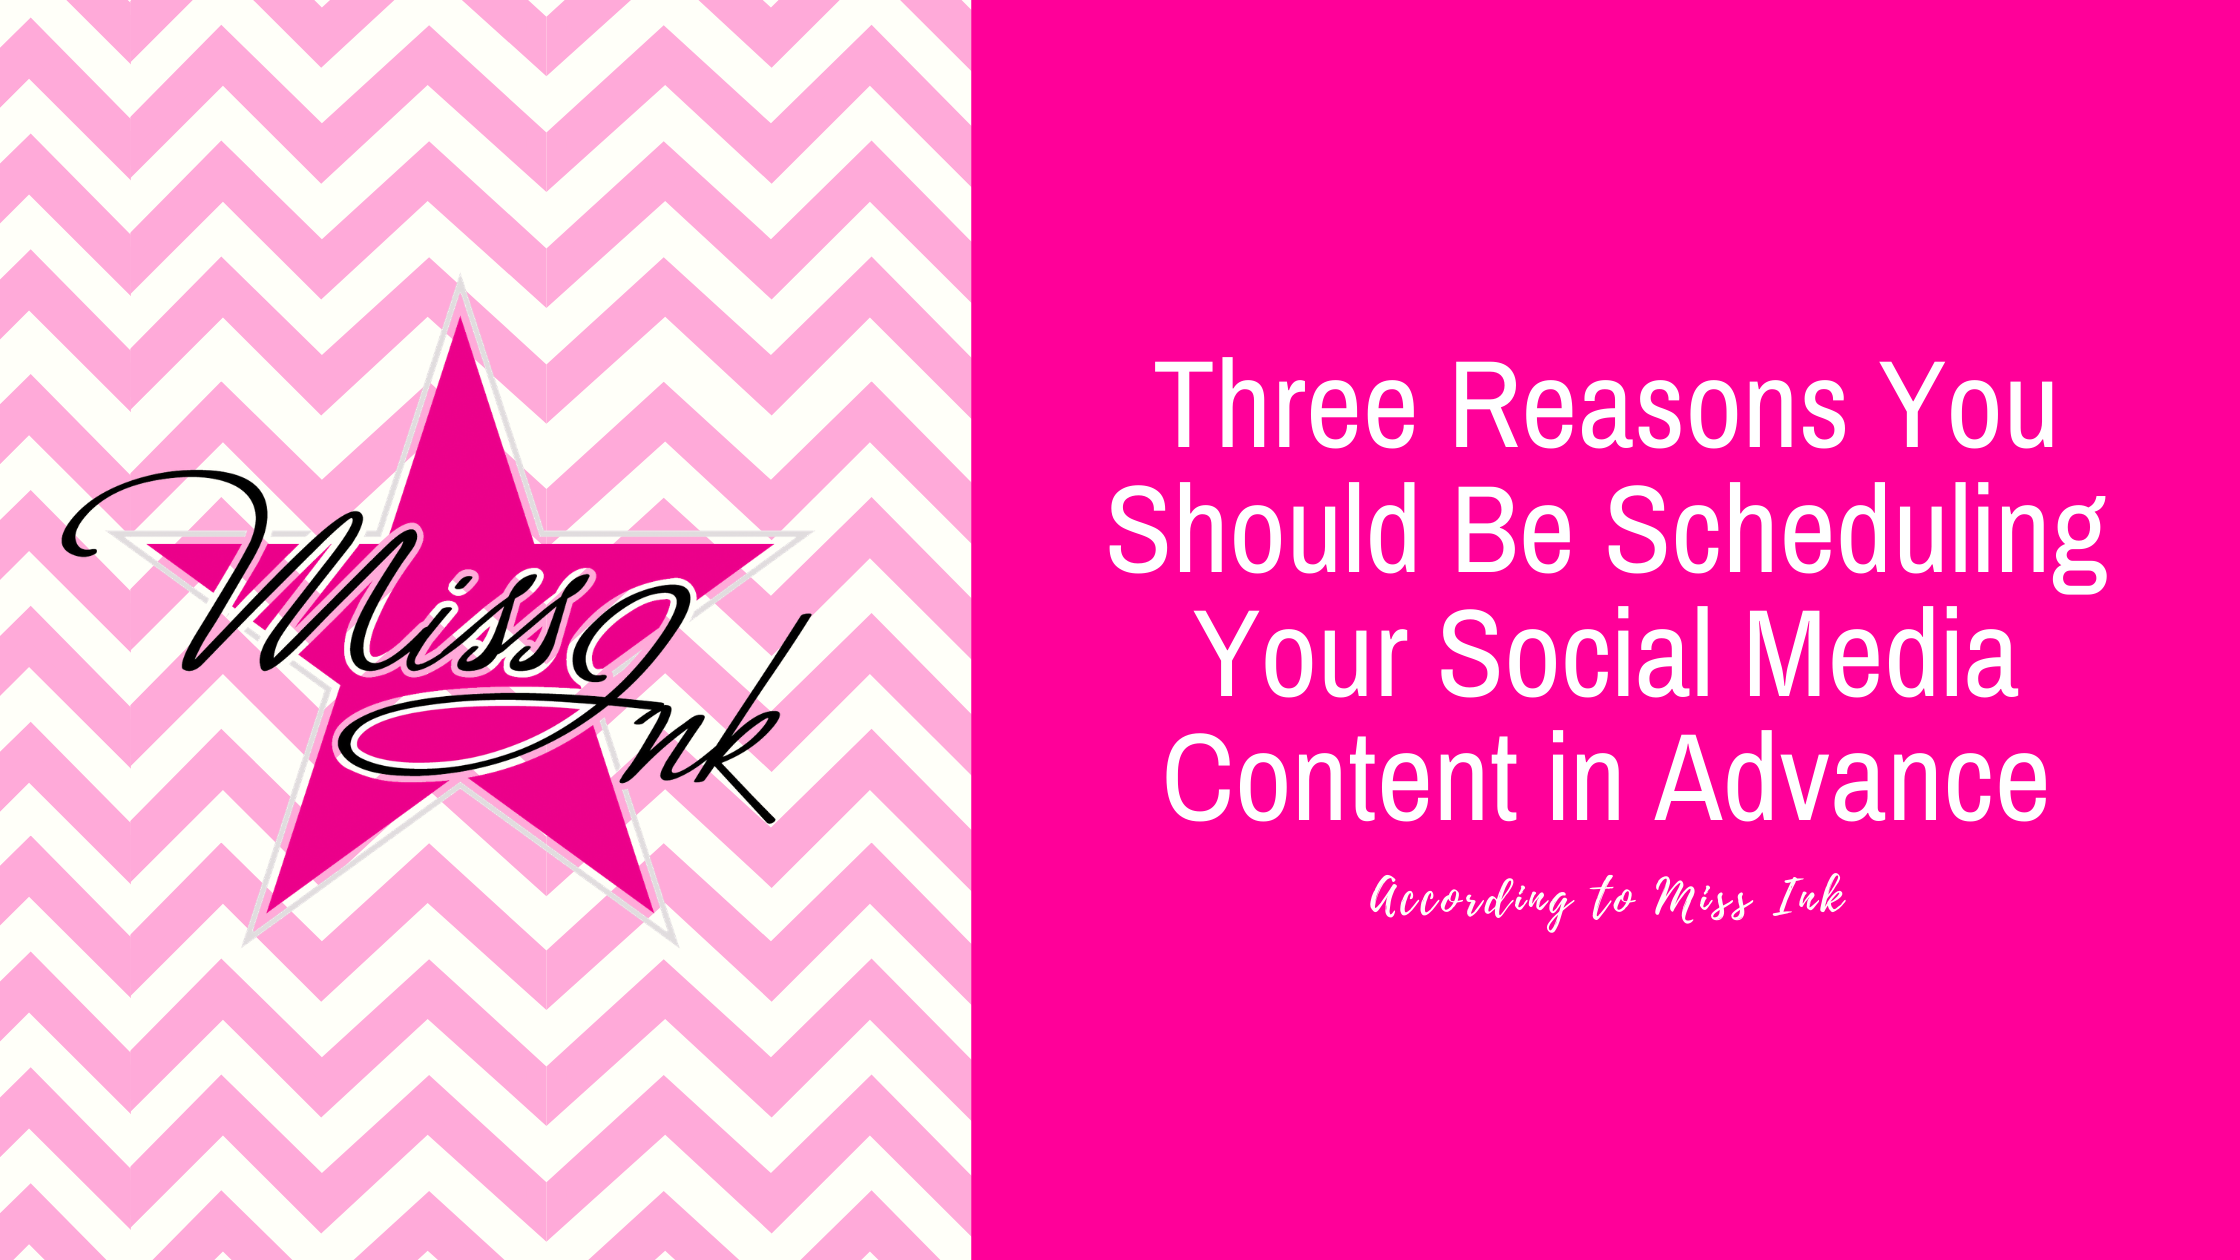 Three Reasons You Should Be Scheduling Your Social Media in Advance